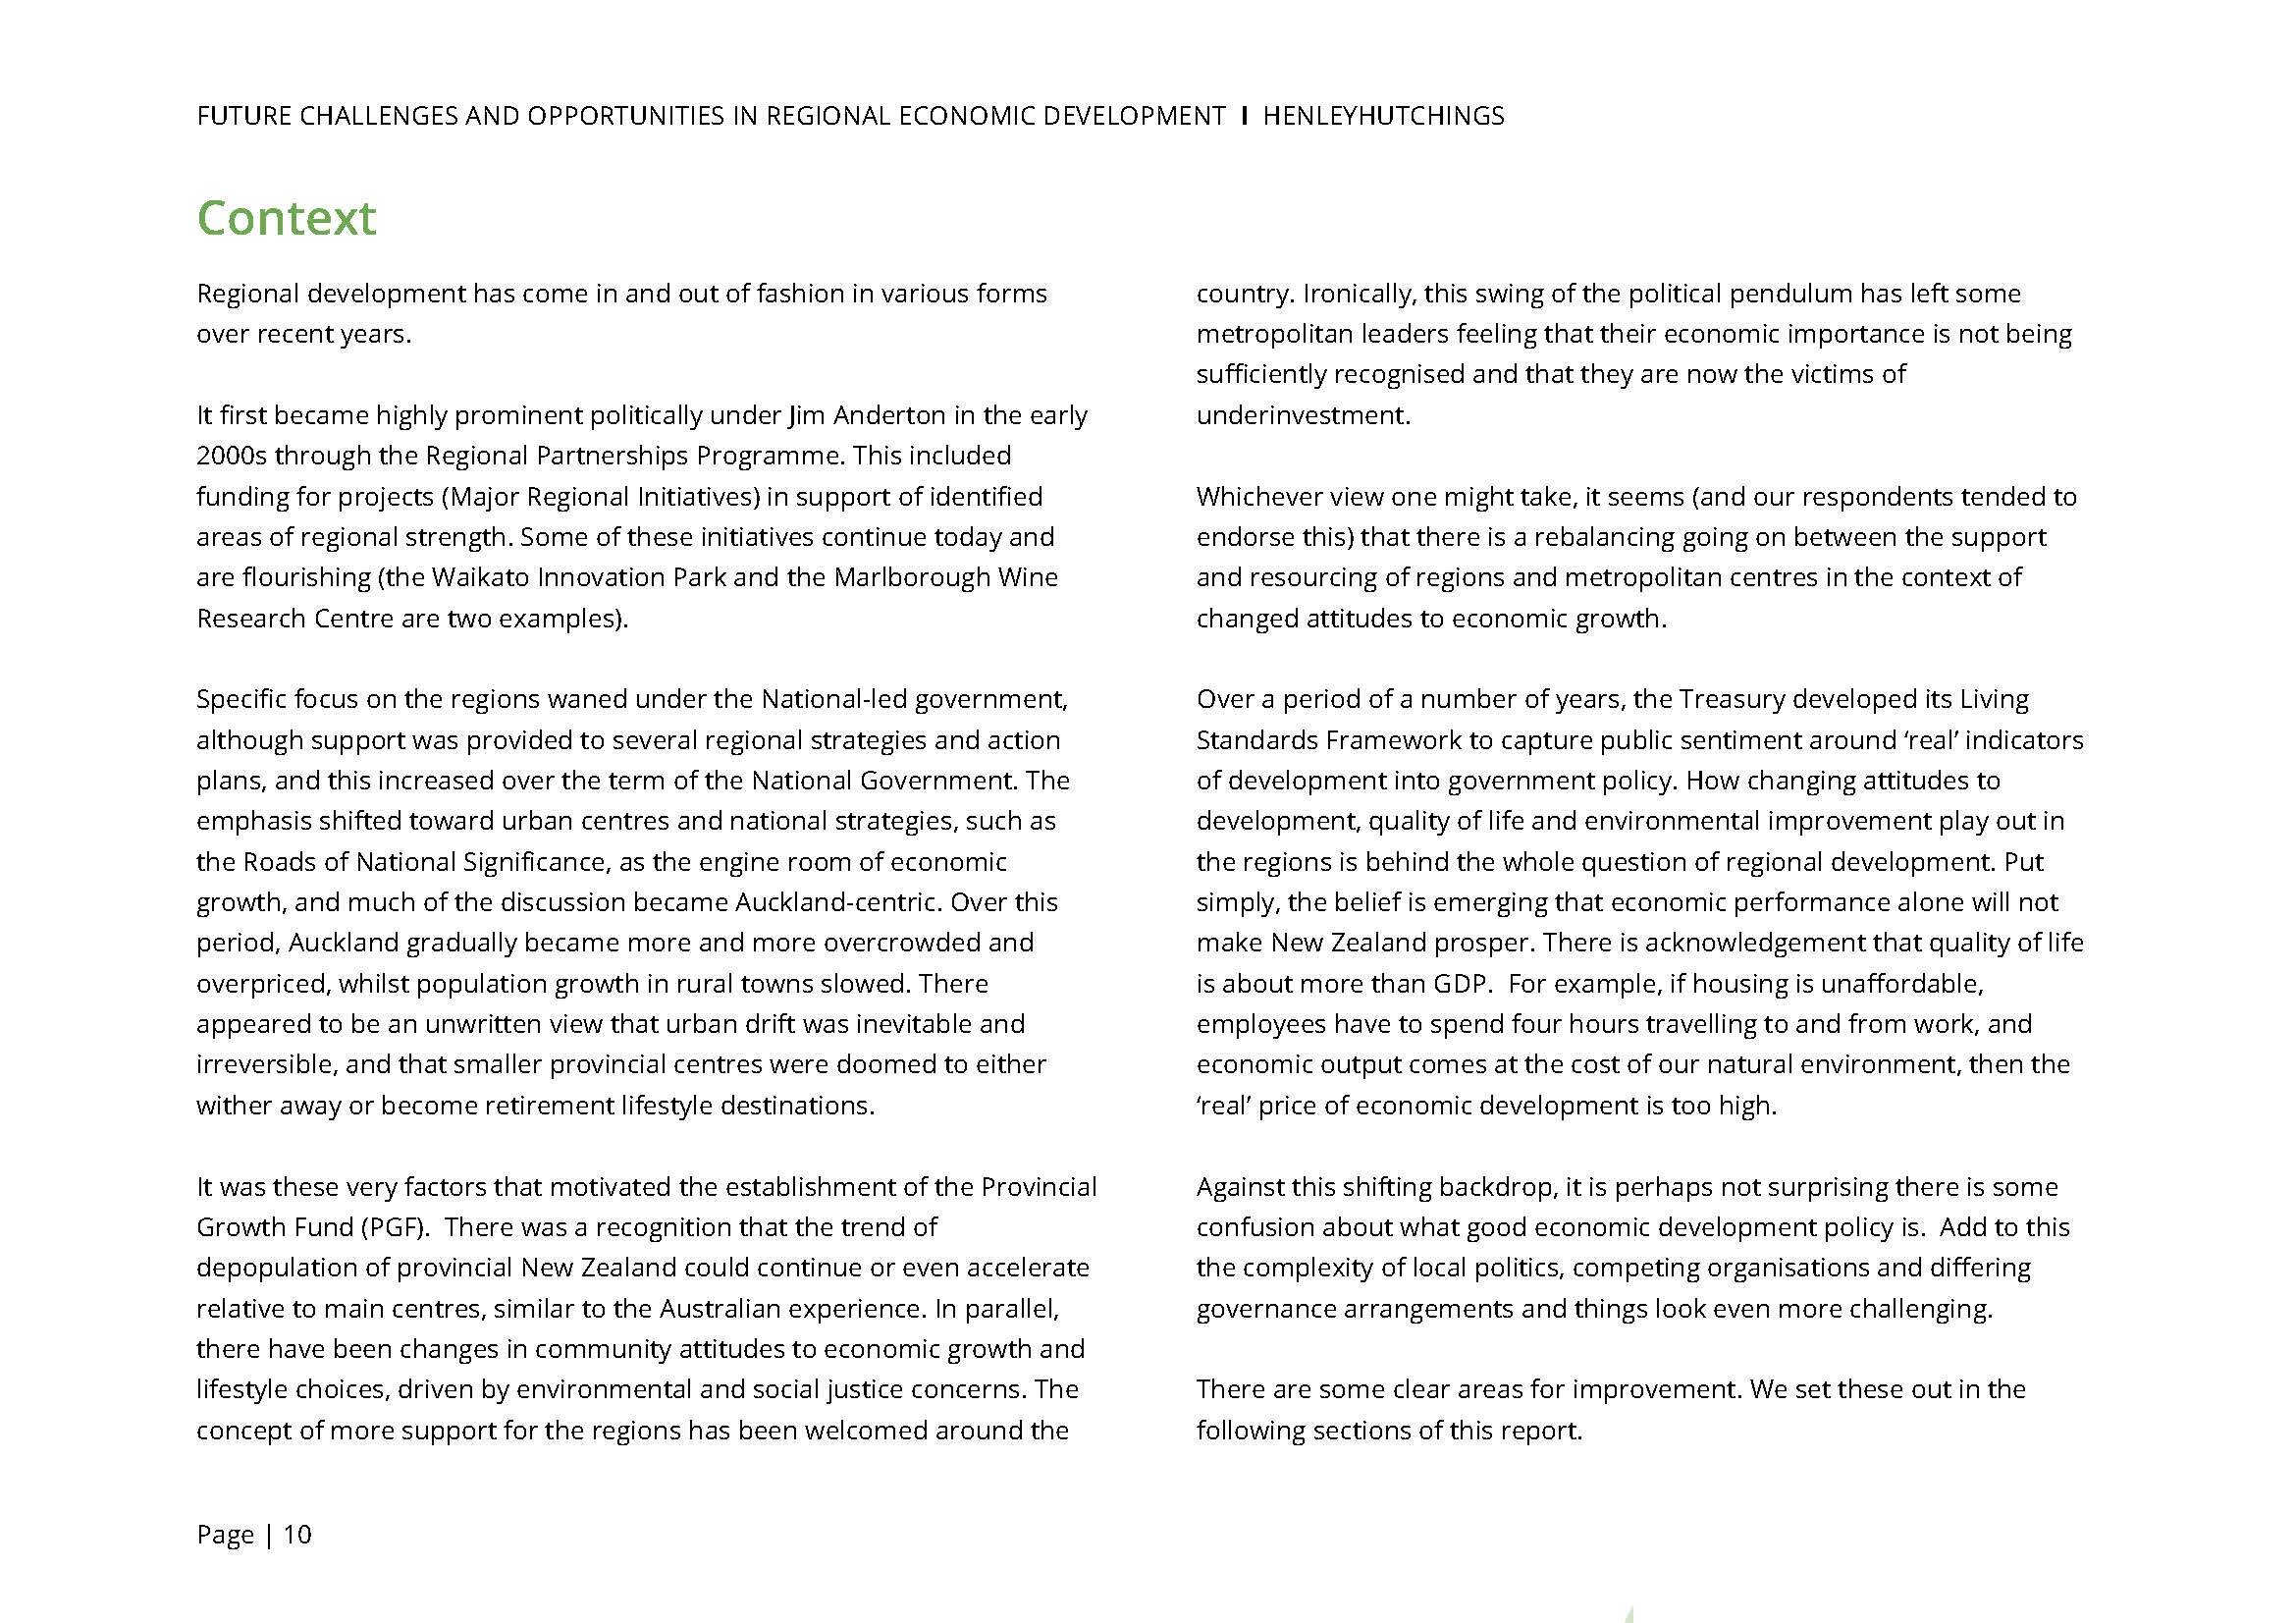 Future Challenges and Opportunities in Economic Development, HenleyHutchings TEST_Page_10.jpg